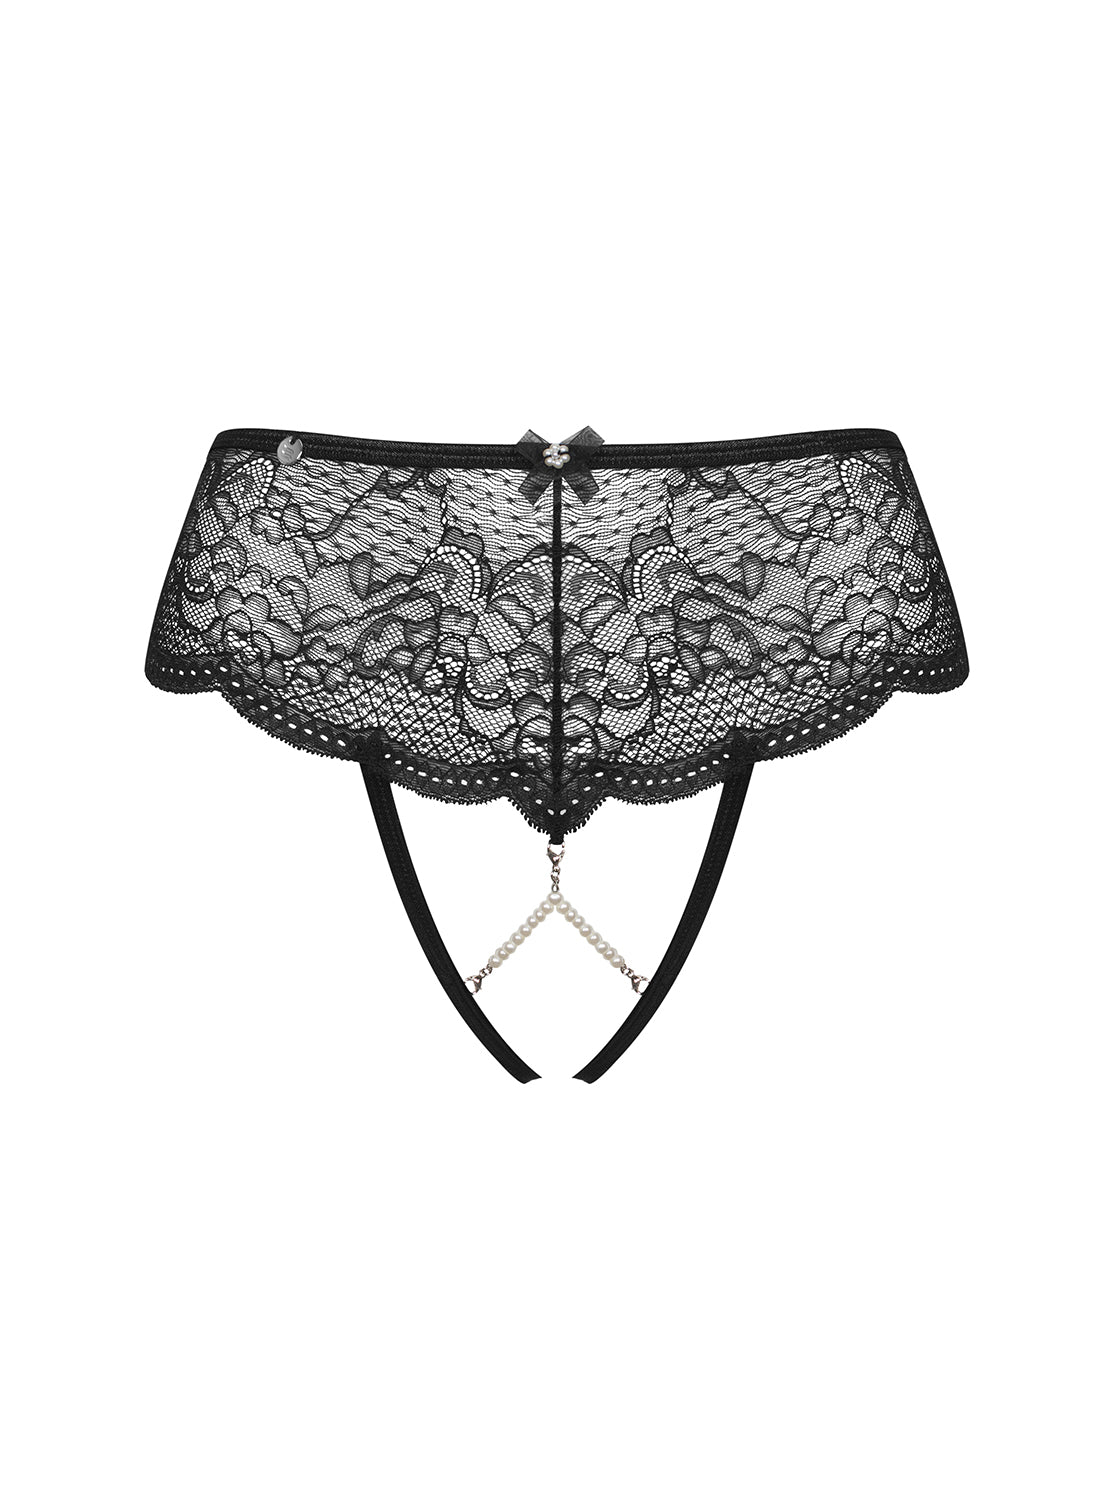 Pearlove a high-cut panty, shiny jewelry details, elegant pearls on the front and open crotch